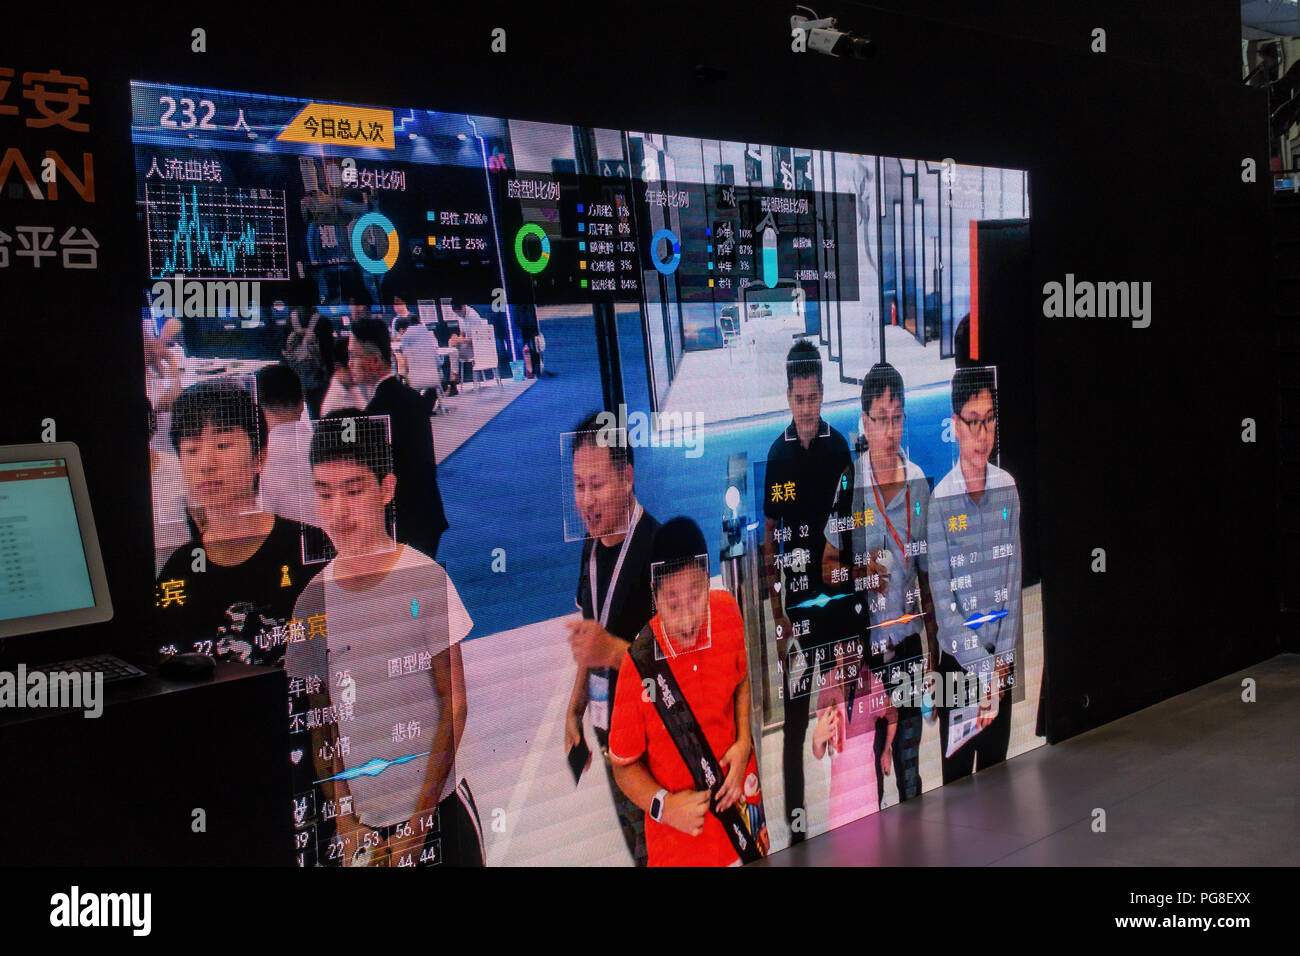 Face monitoring and surveillance technology exhibit at a Smart City Expo in China. Stock Photo